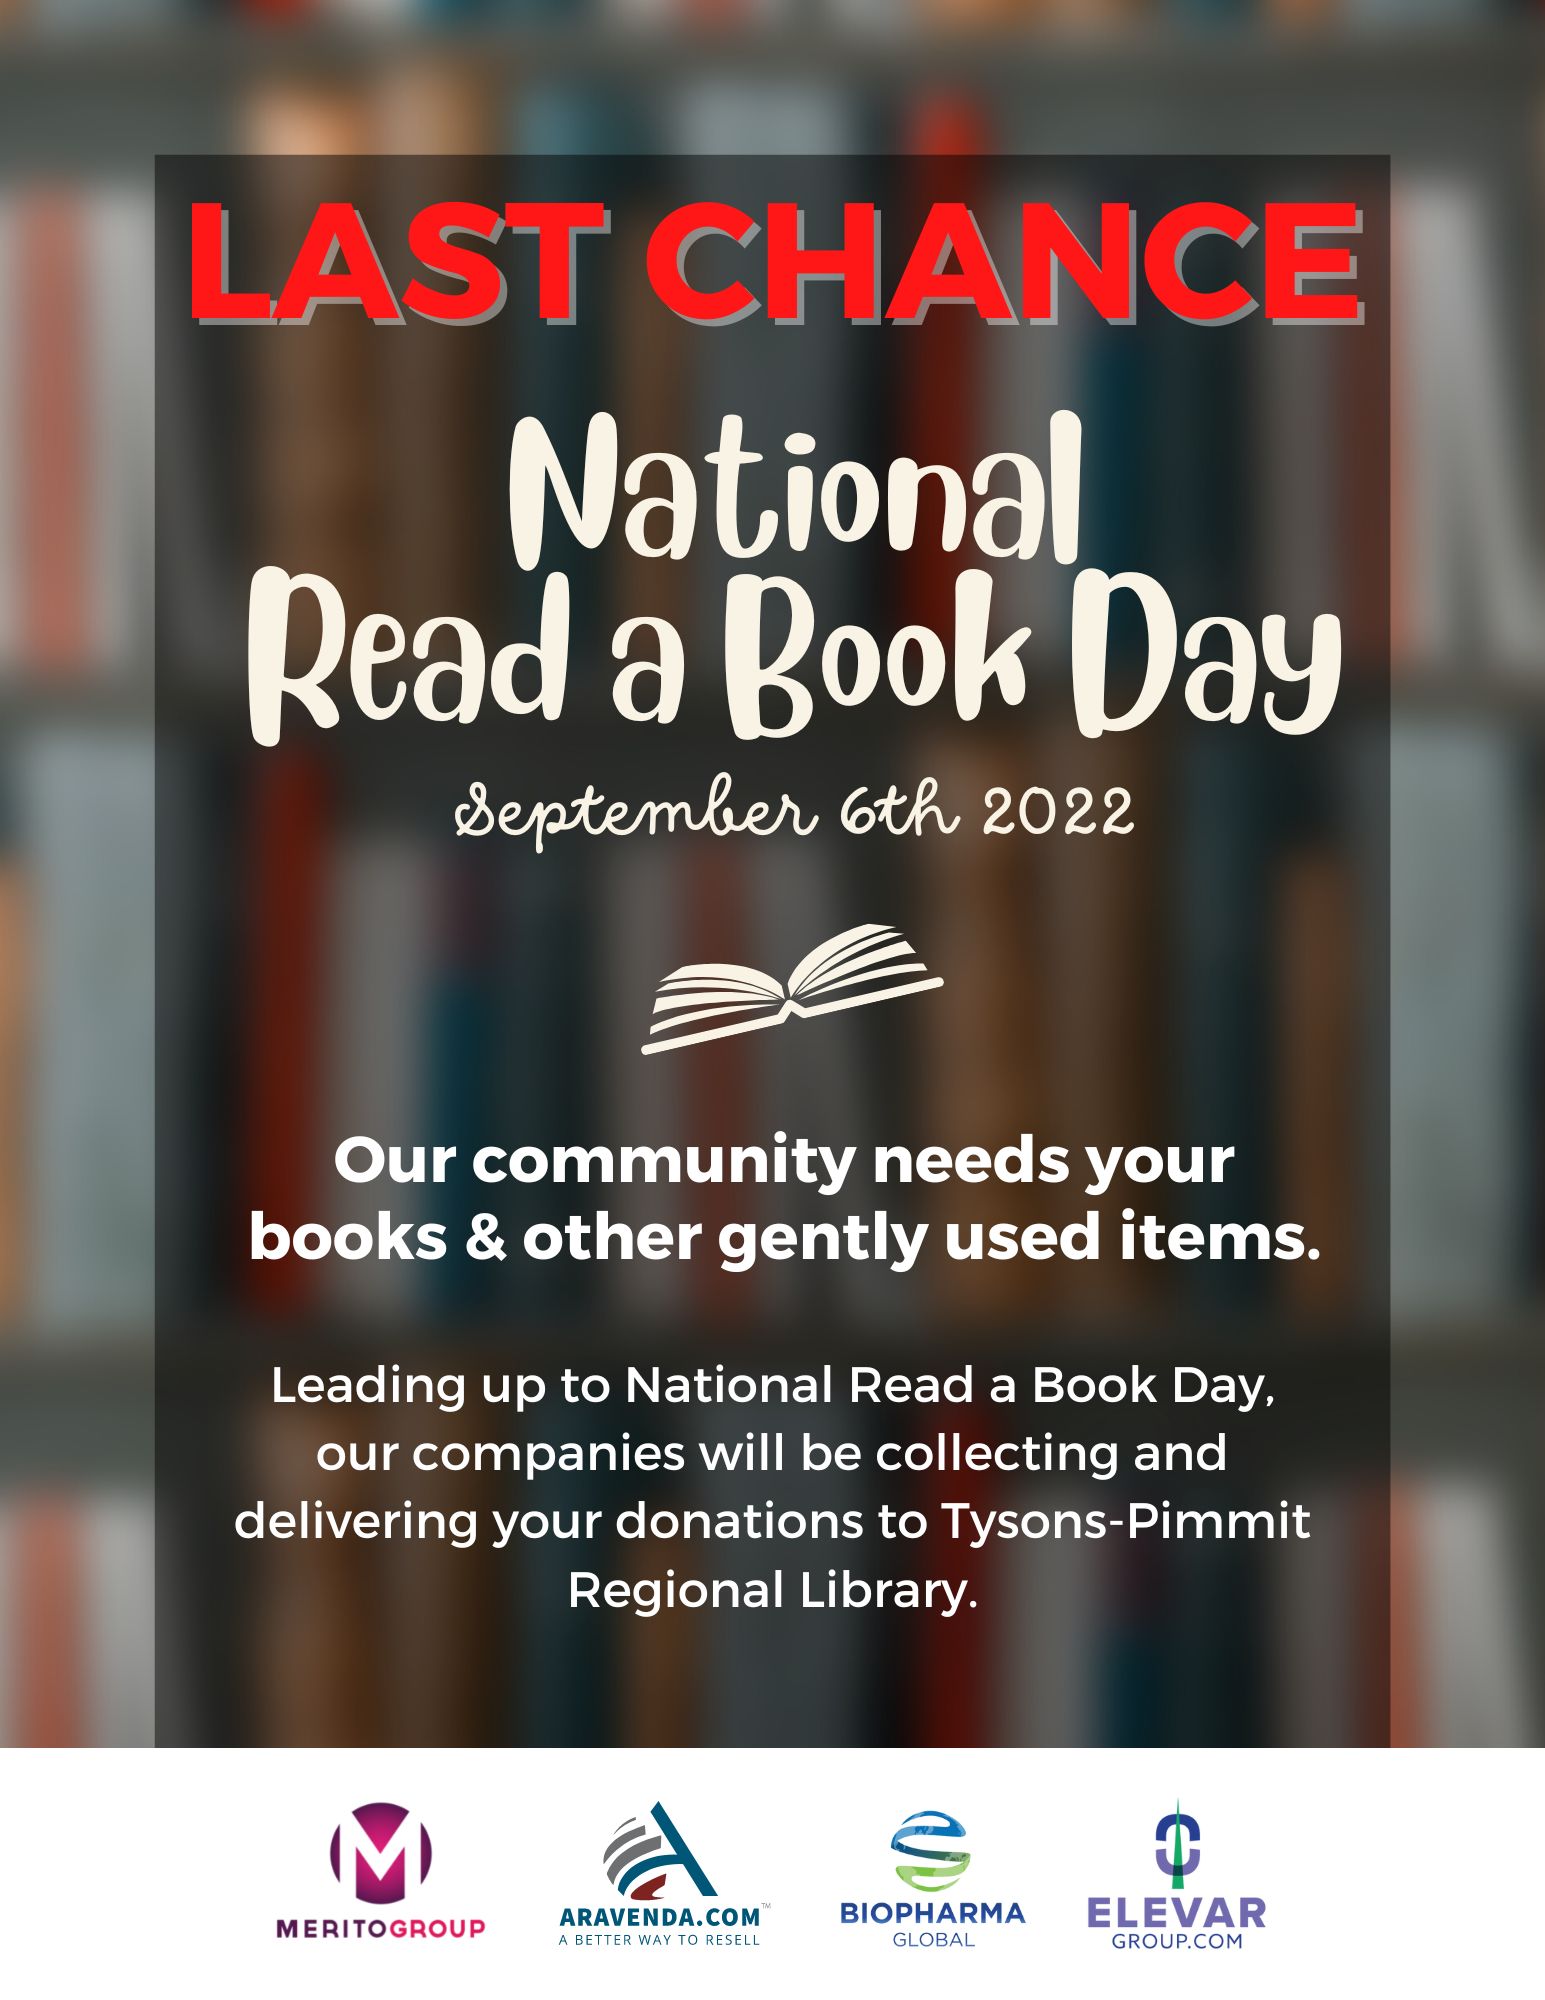 “National Read a Book Day” Book Drive: LAST CHANCE TO DONATE